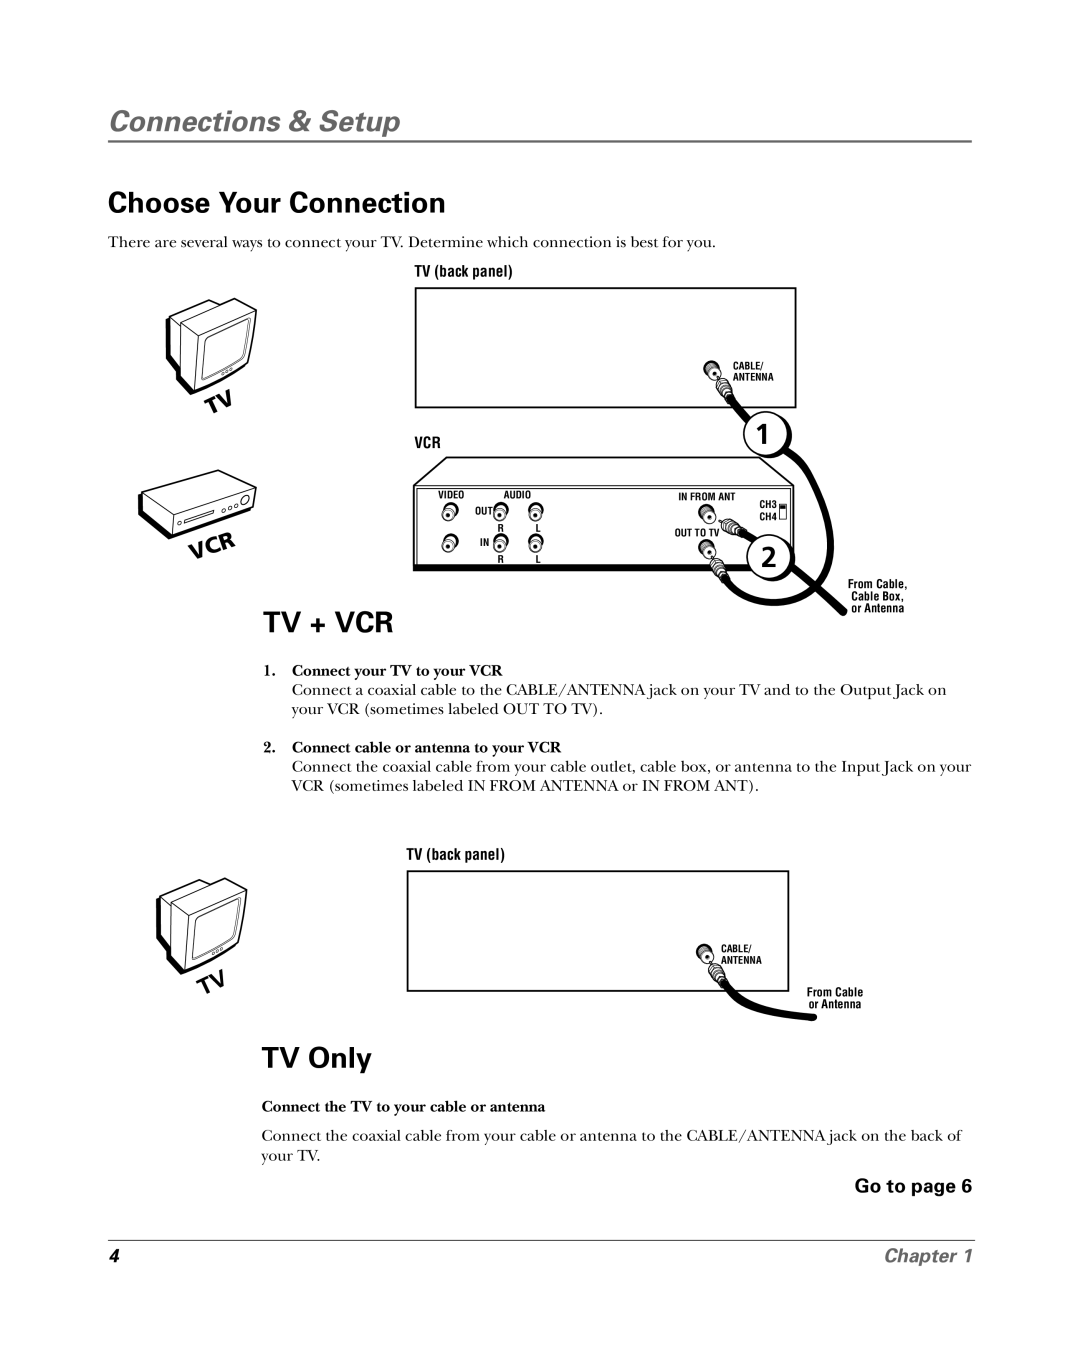 RCA 15956220 manual Connections & Setup, Choose Your Connection, Tv + Vcr, TV Only, Go to page, Chapter, TV back panel 